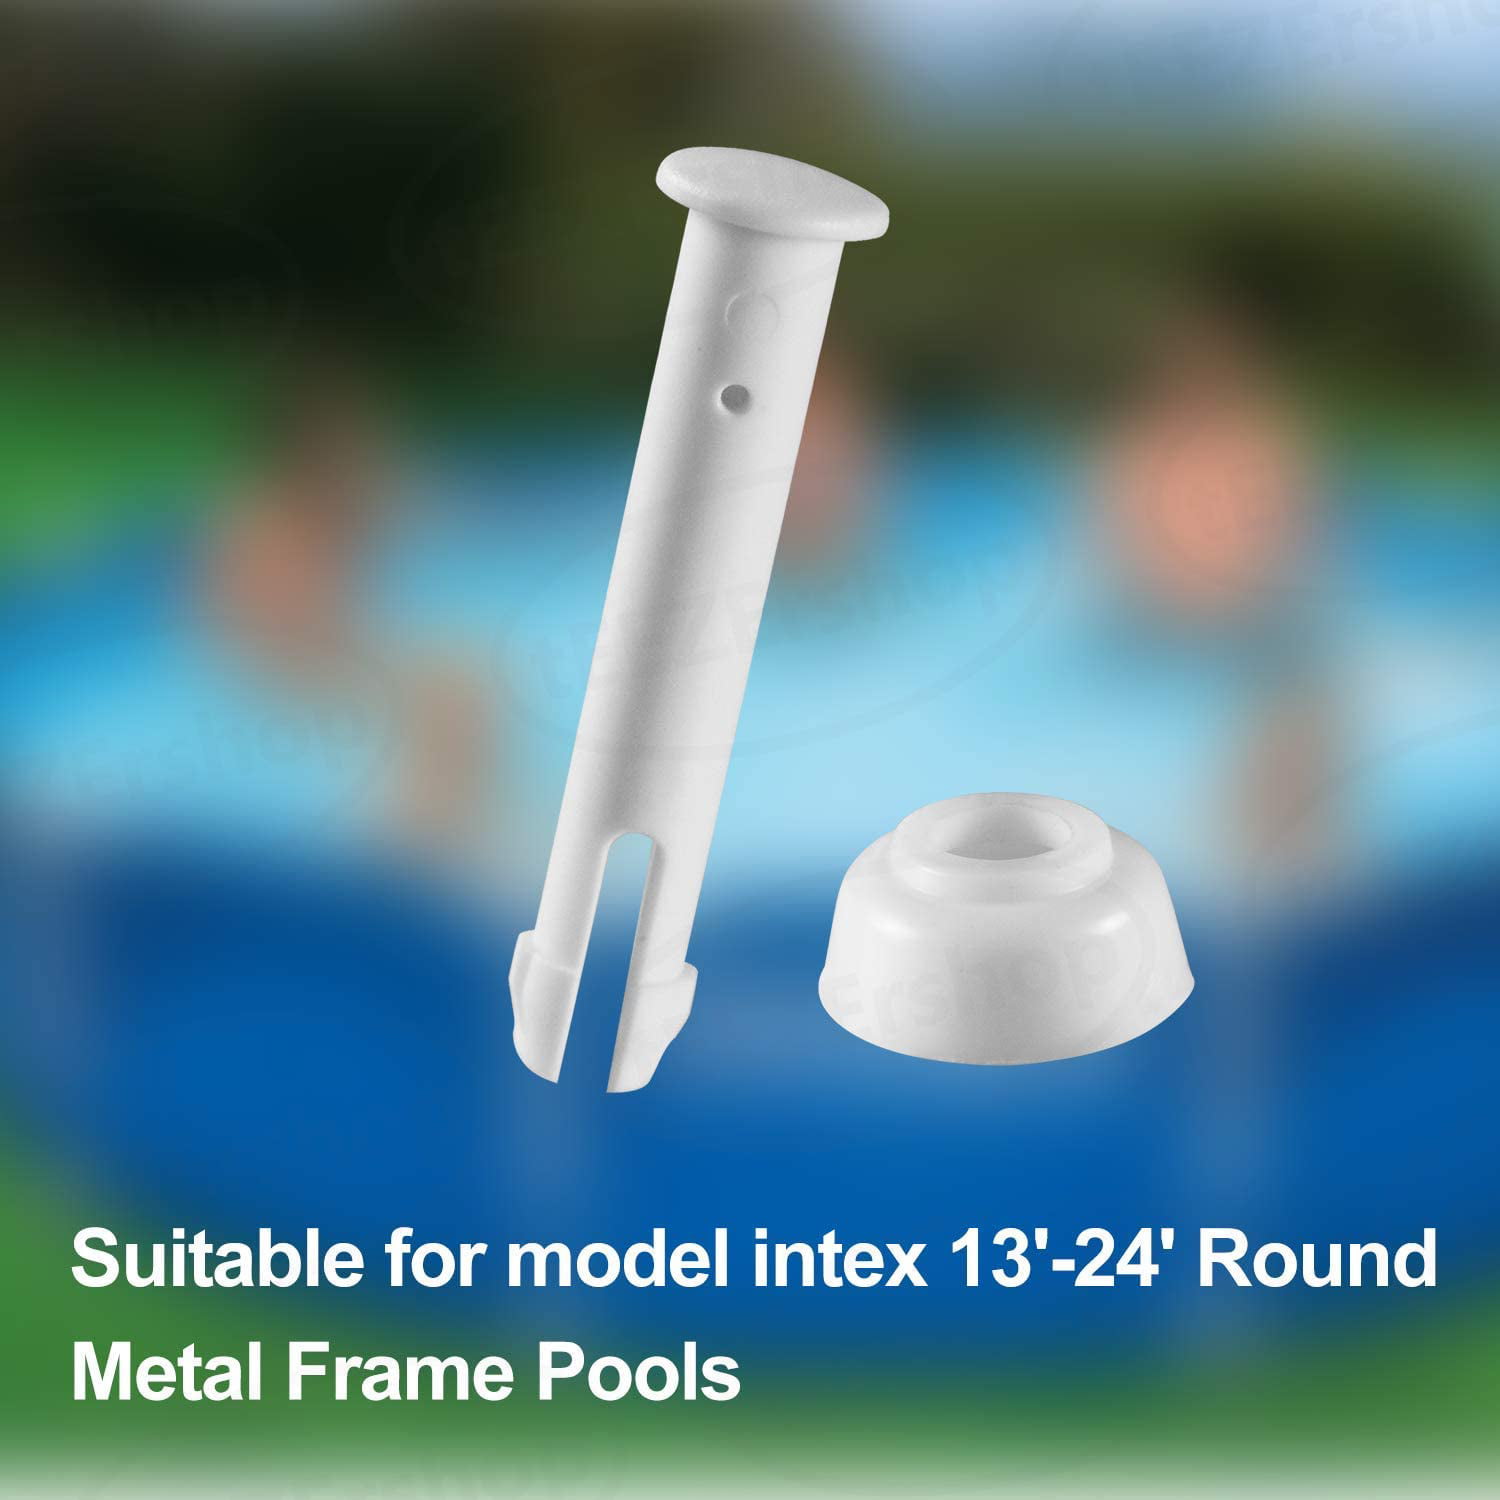 pin splint pin ment spare parts pins and seals suitable for frame swimming pools pin splint pin 12 pieces pool parts 12 pool parts